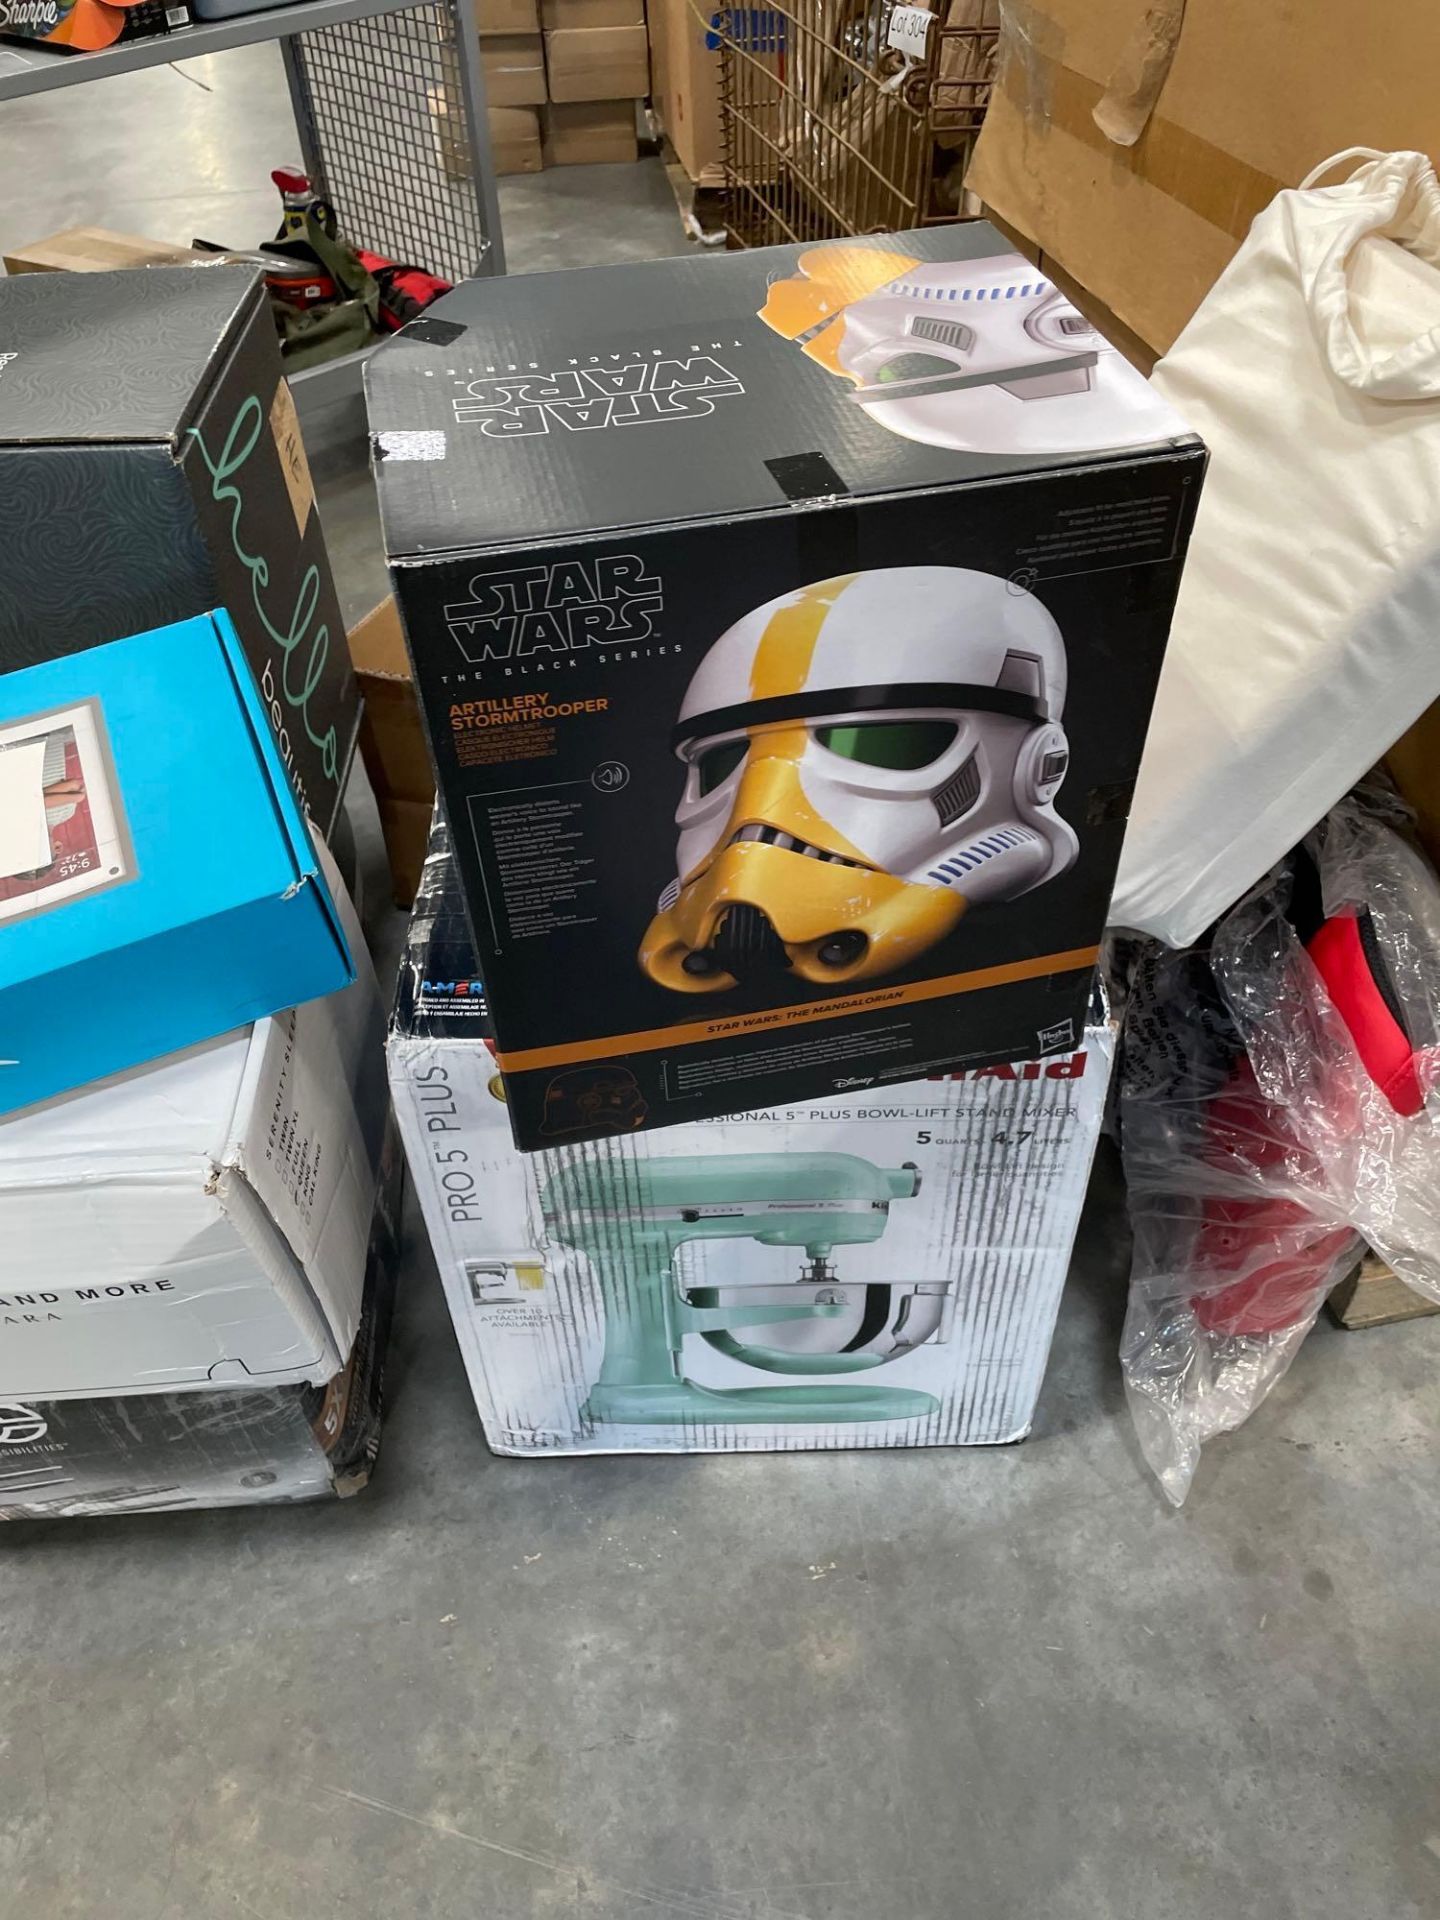 Kitchen Aids, Crockpot, Nespresso and more - Image 13 of 15